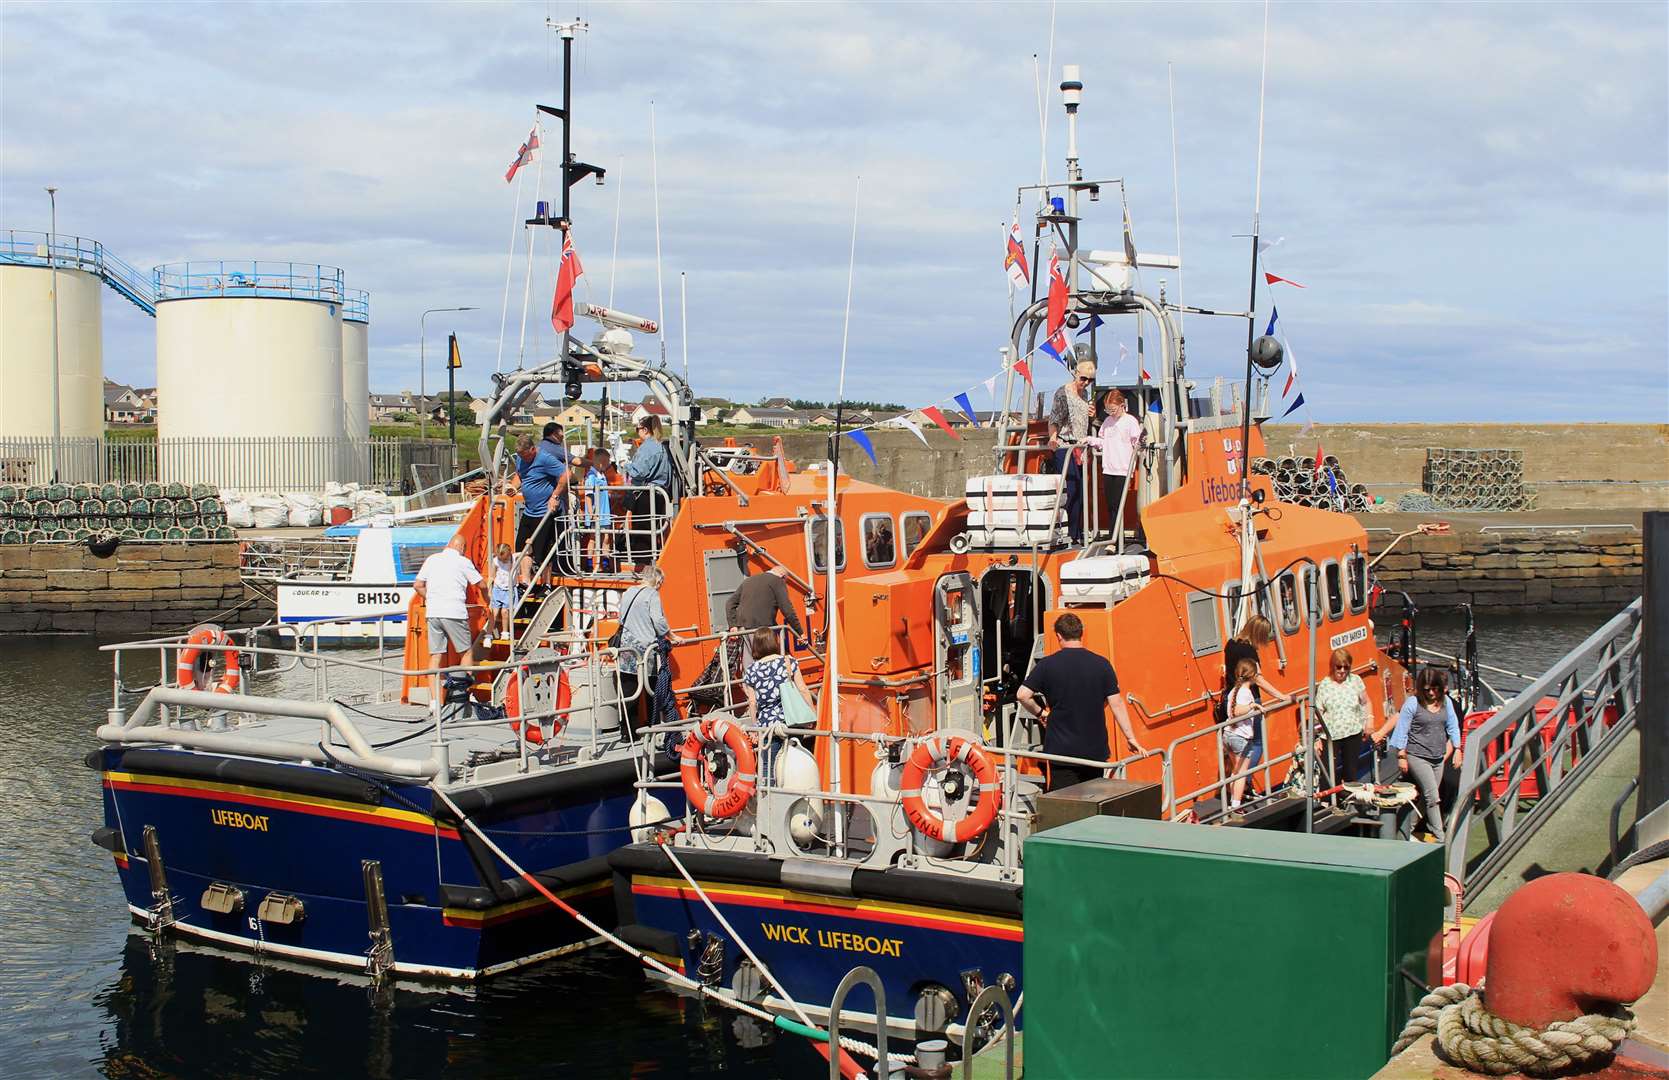 The Longhope and Wick lifeboats side by side. Picture: Alan Hendry